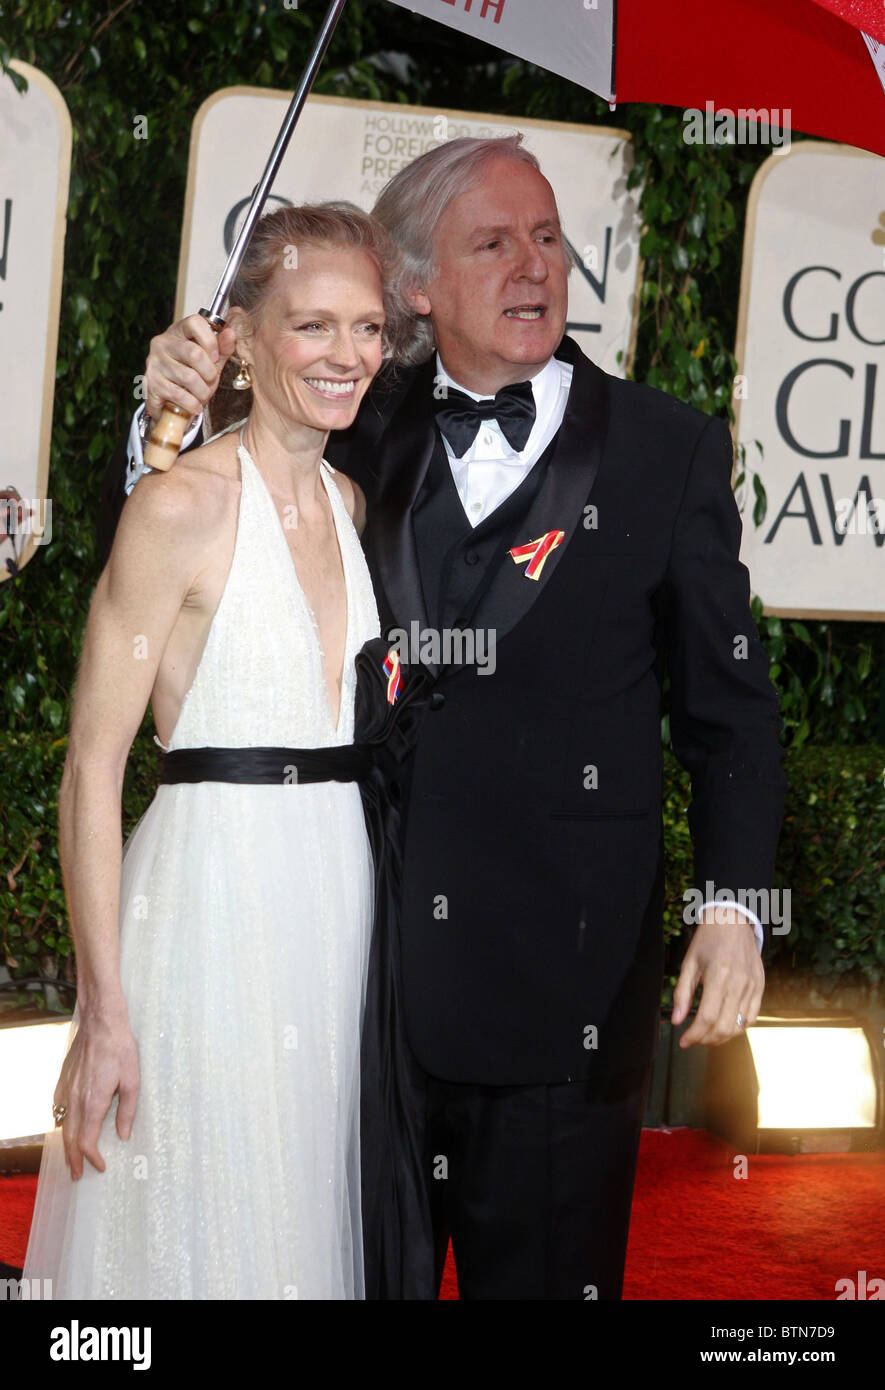 The 67th Annual Golden Globes Awards - ARRIVALS Stock Photo